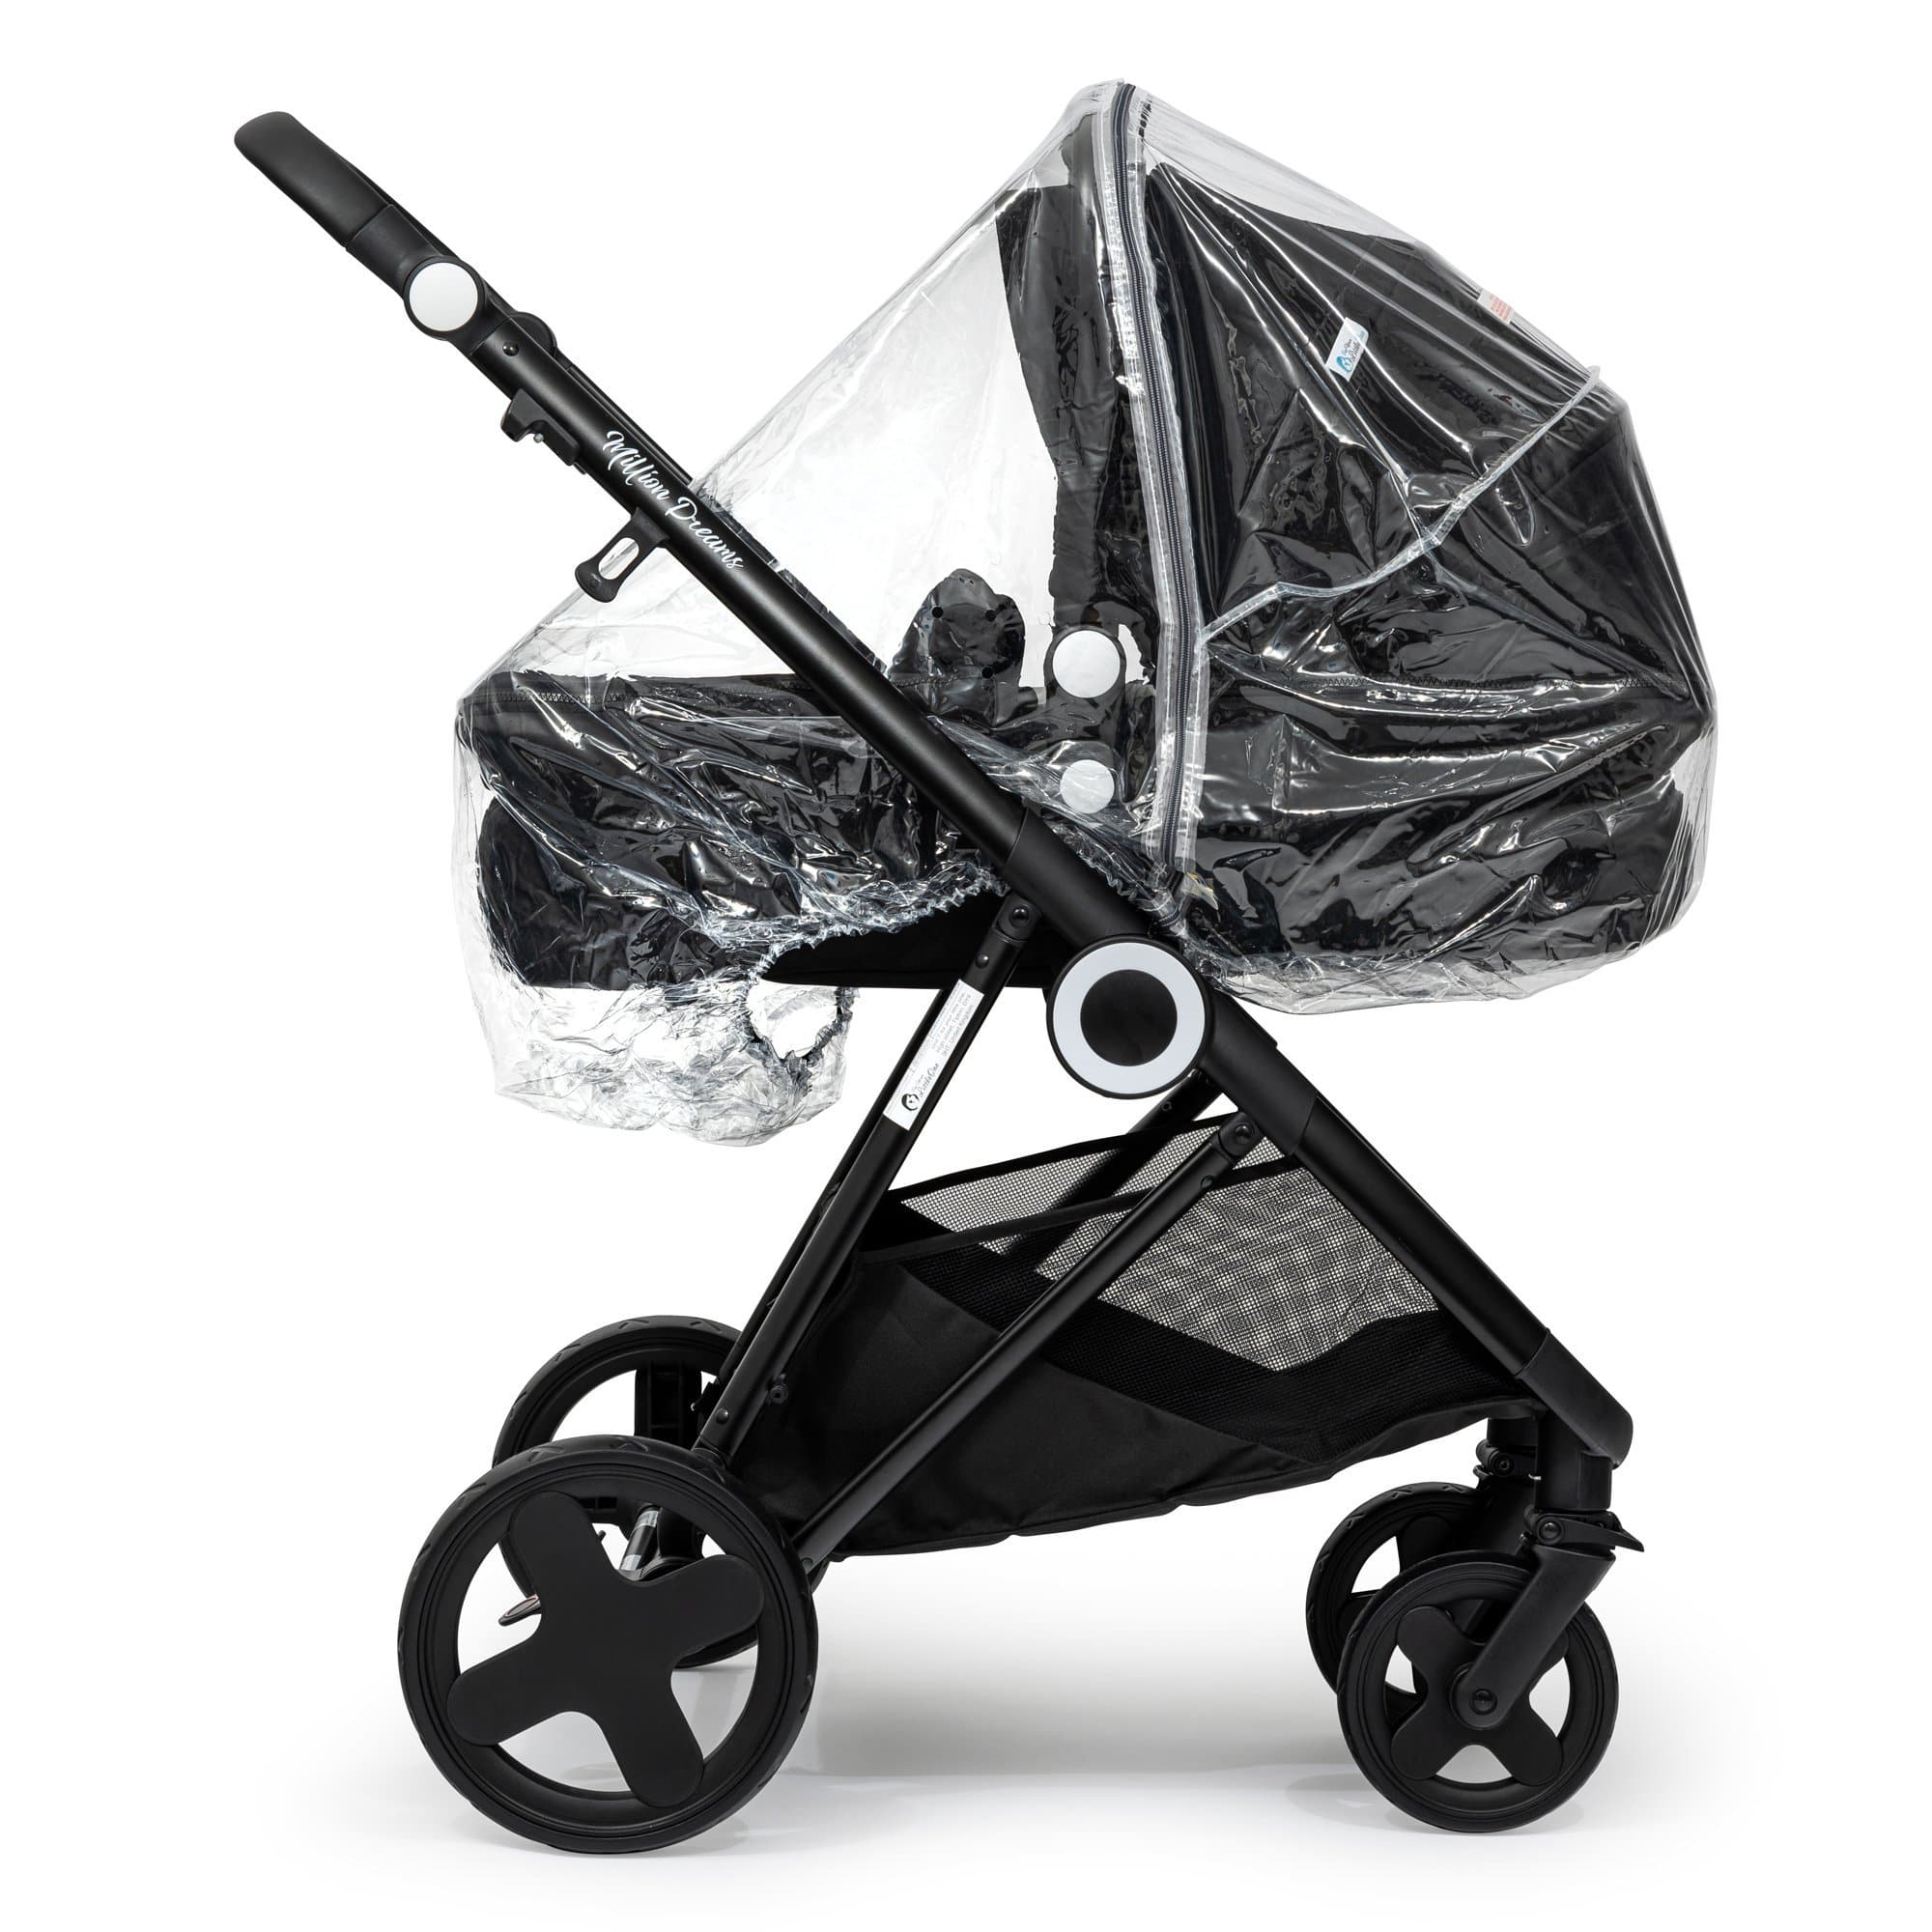 2 in 1 Rain Cover Compatible with Bebe Confort - Fits All Models - For Your Little One